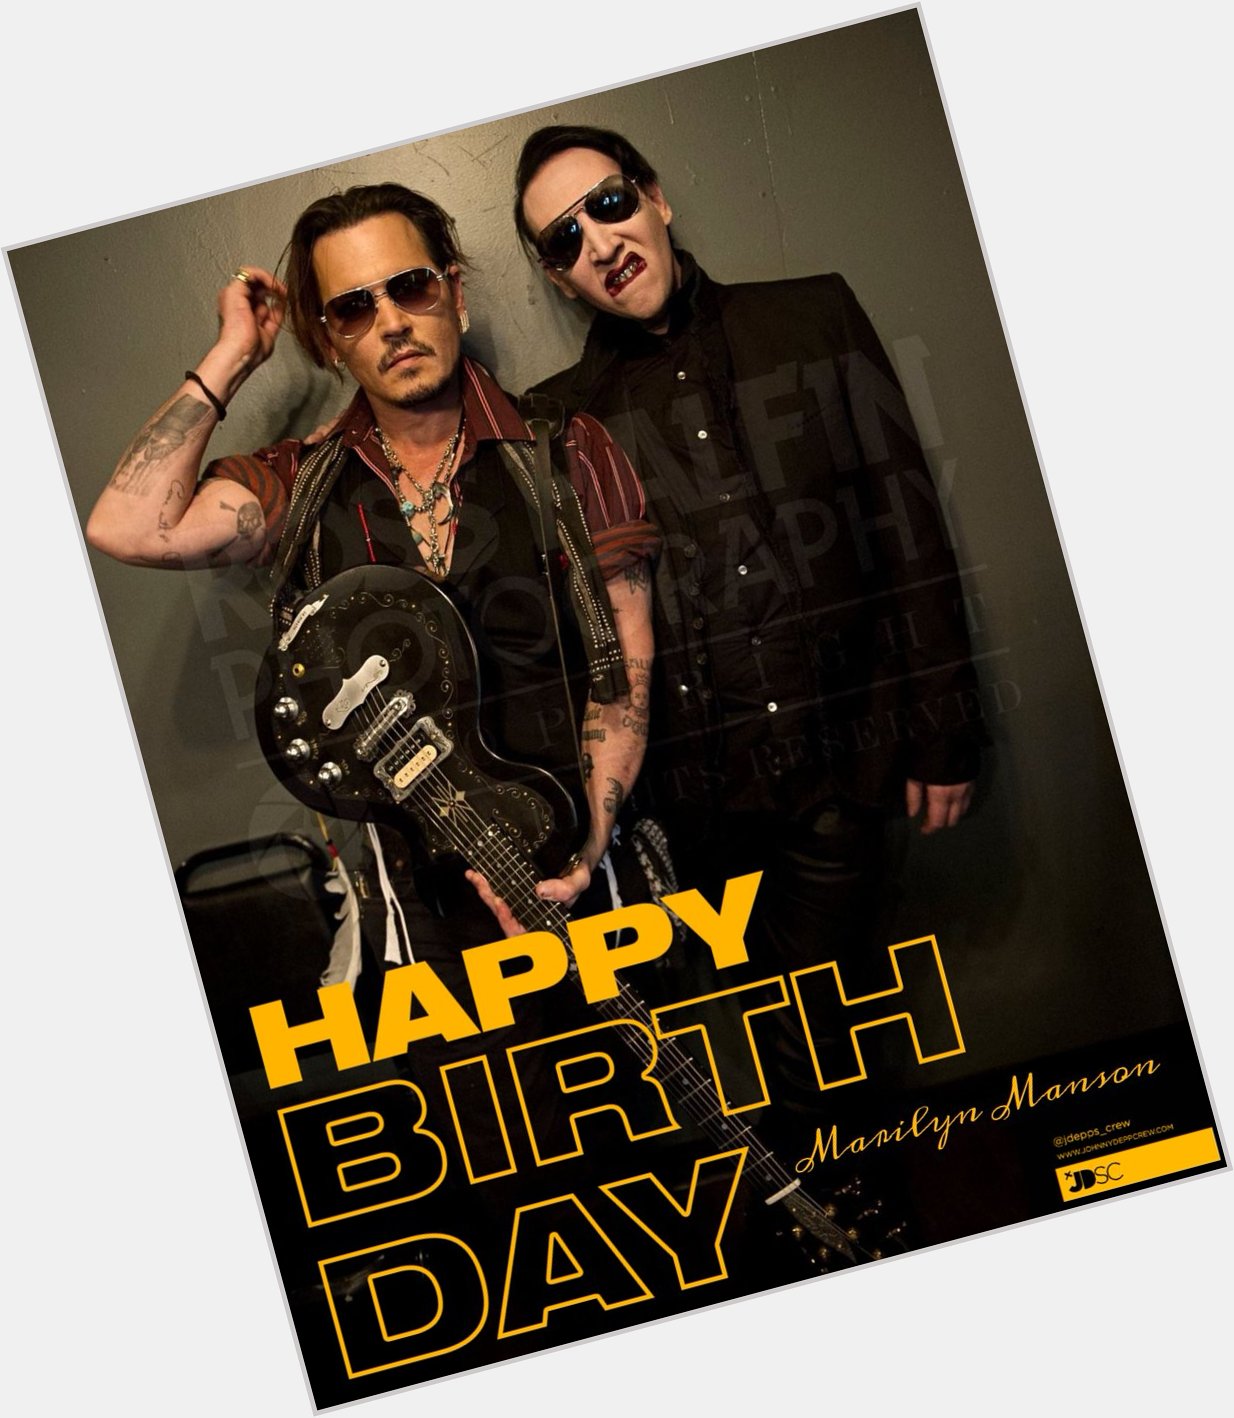 Happy Birthday to his friend and artist Marilyn Manson! 